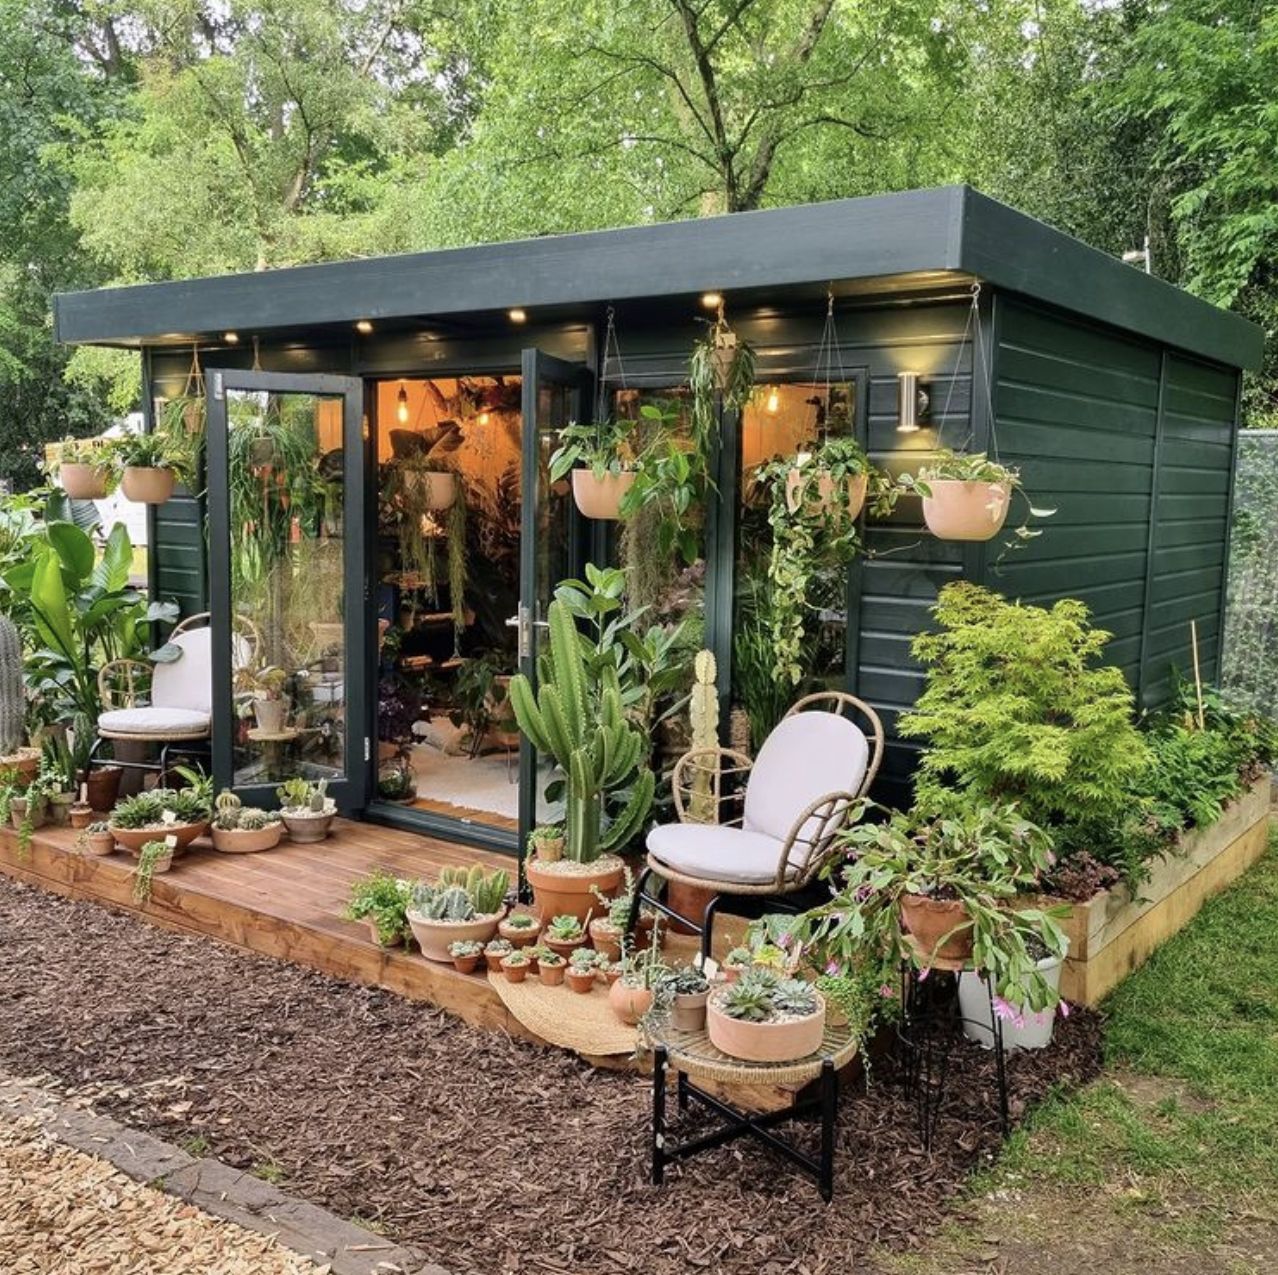 The Charm of Compact Garden Dwellings